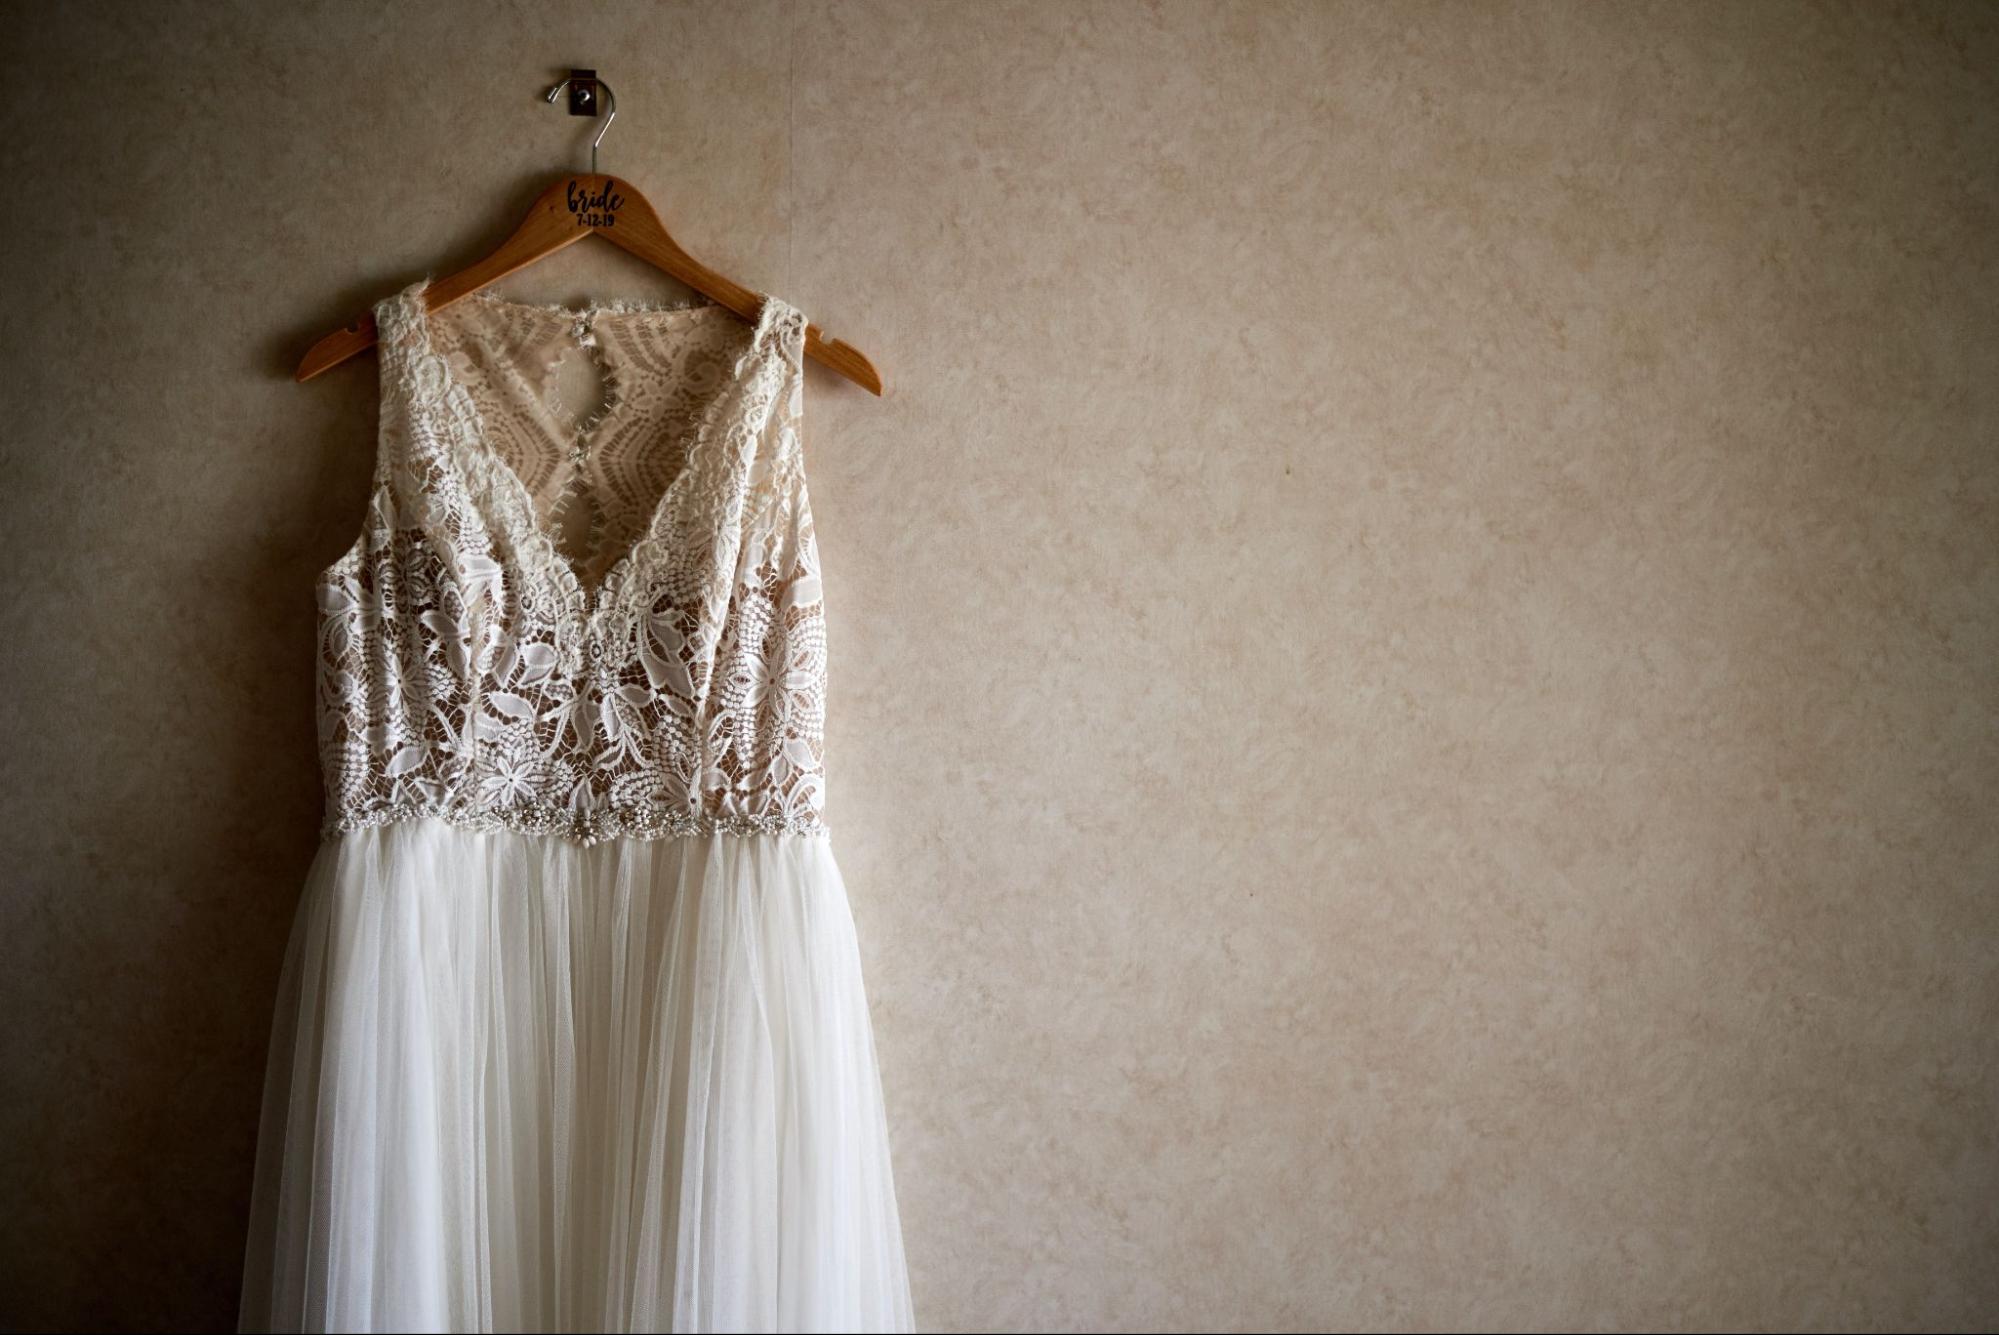 Why Are Wedding Dresses White?